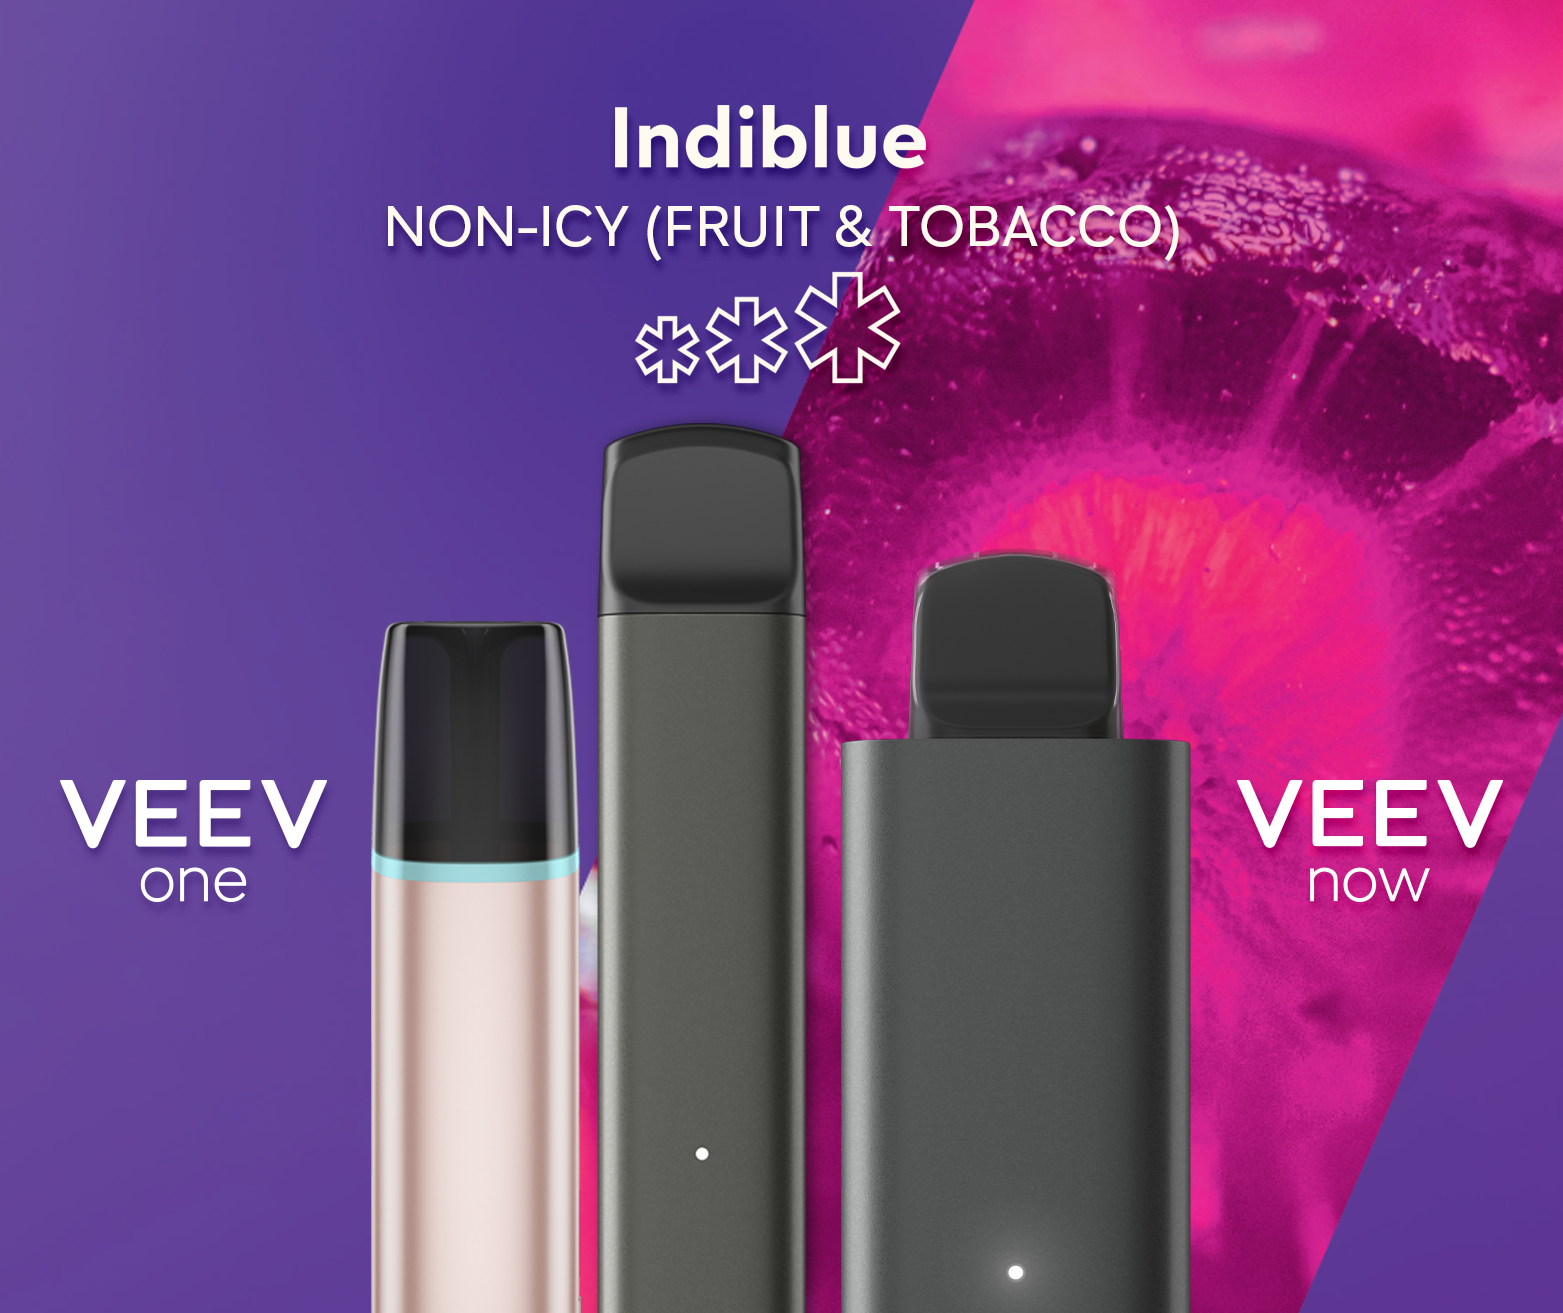 A VEEV ONE pod device and VEEV NOW disposable, both in Indiblue flavour.